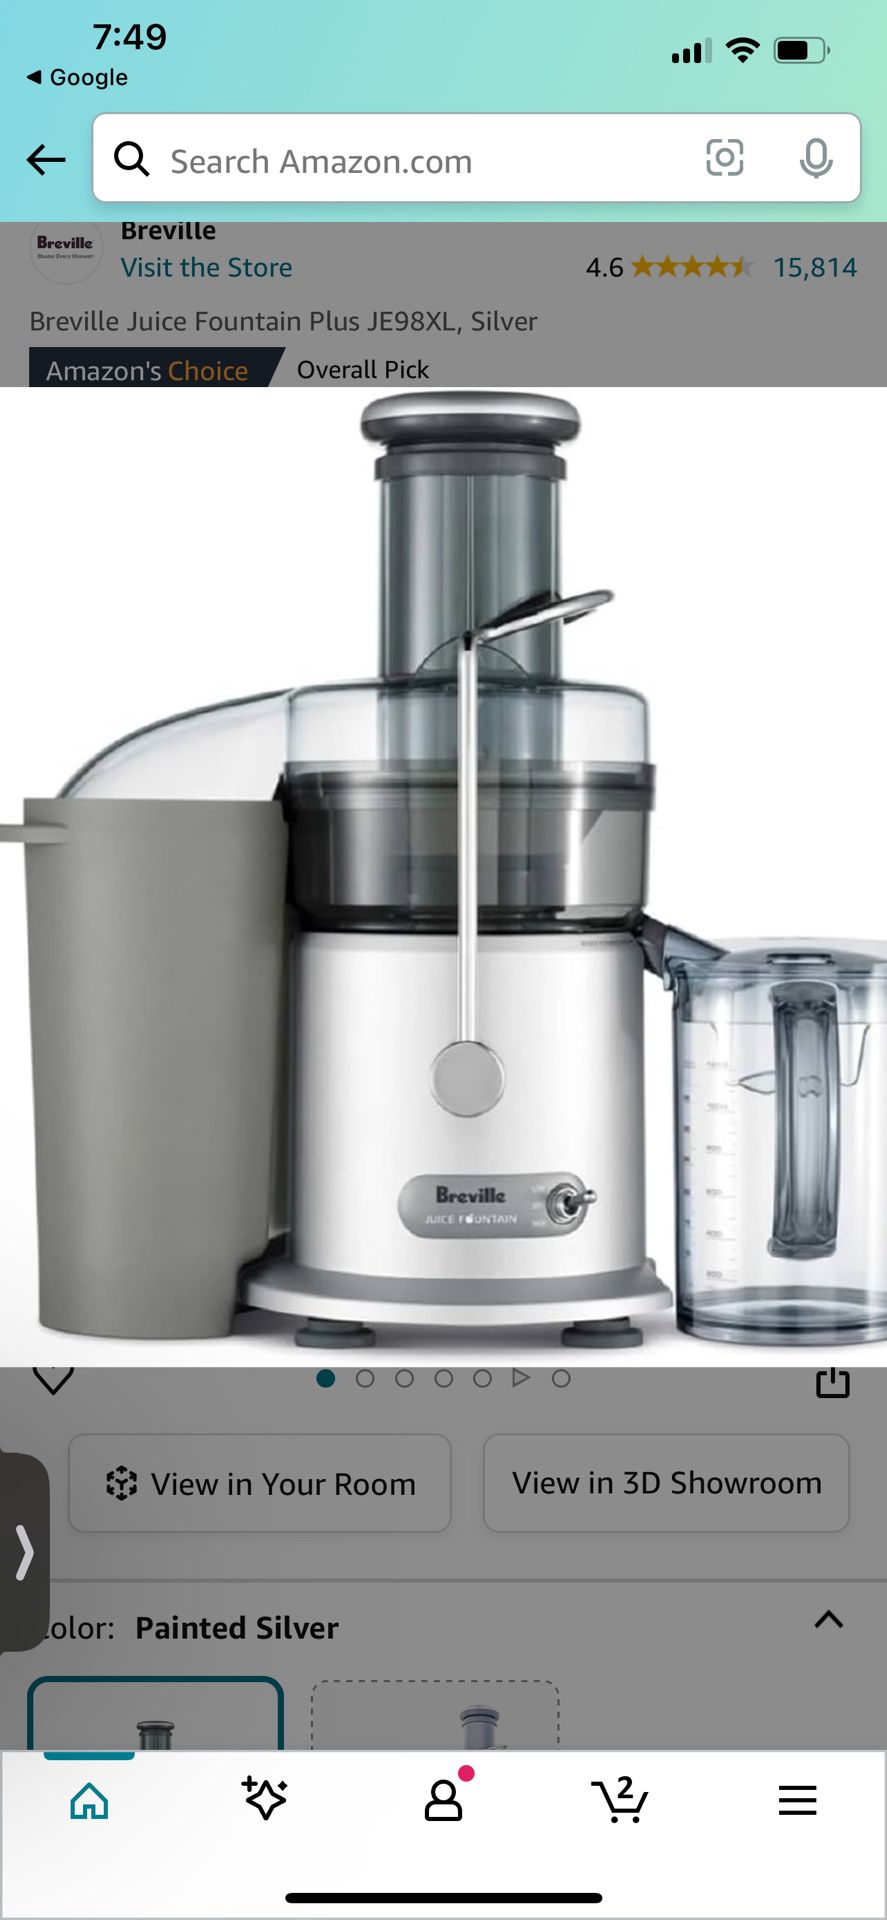  Breville  The Fountain Juicer 